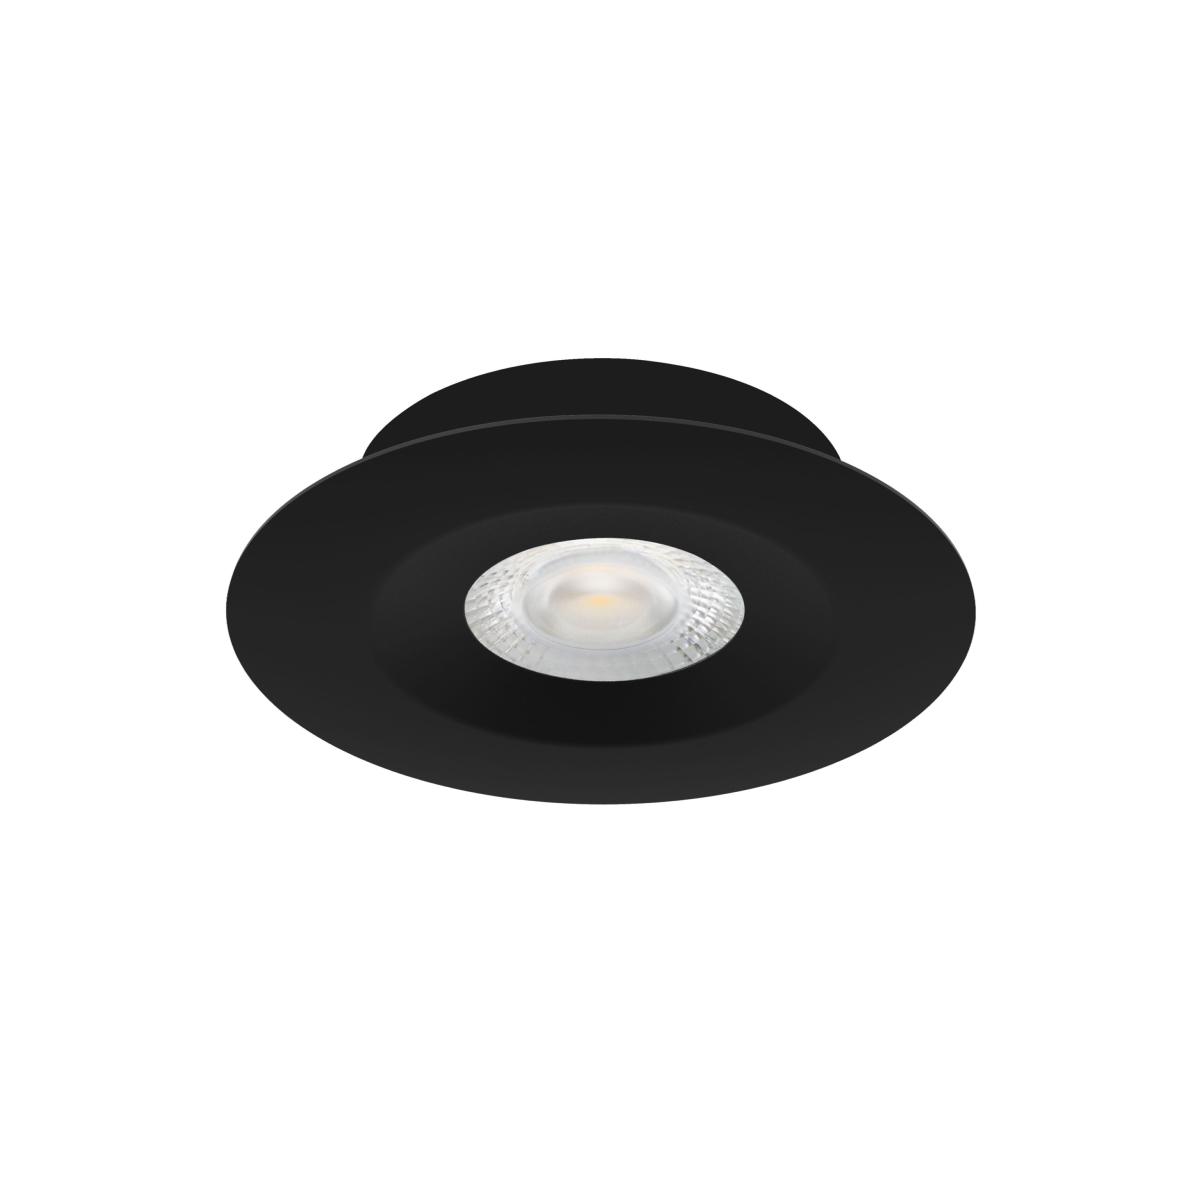 Spot LED extra-plat dimmable recouvrable isolant ARIC 5W 36° 220V Aspen  50748.